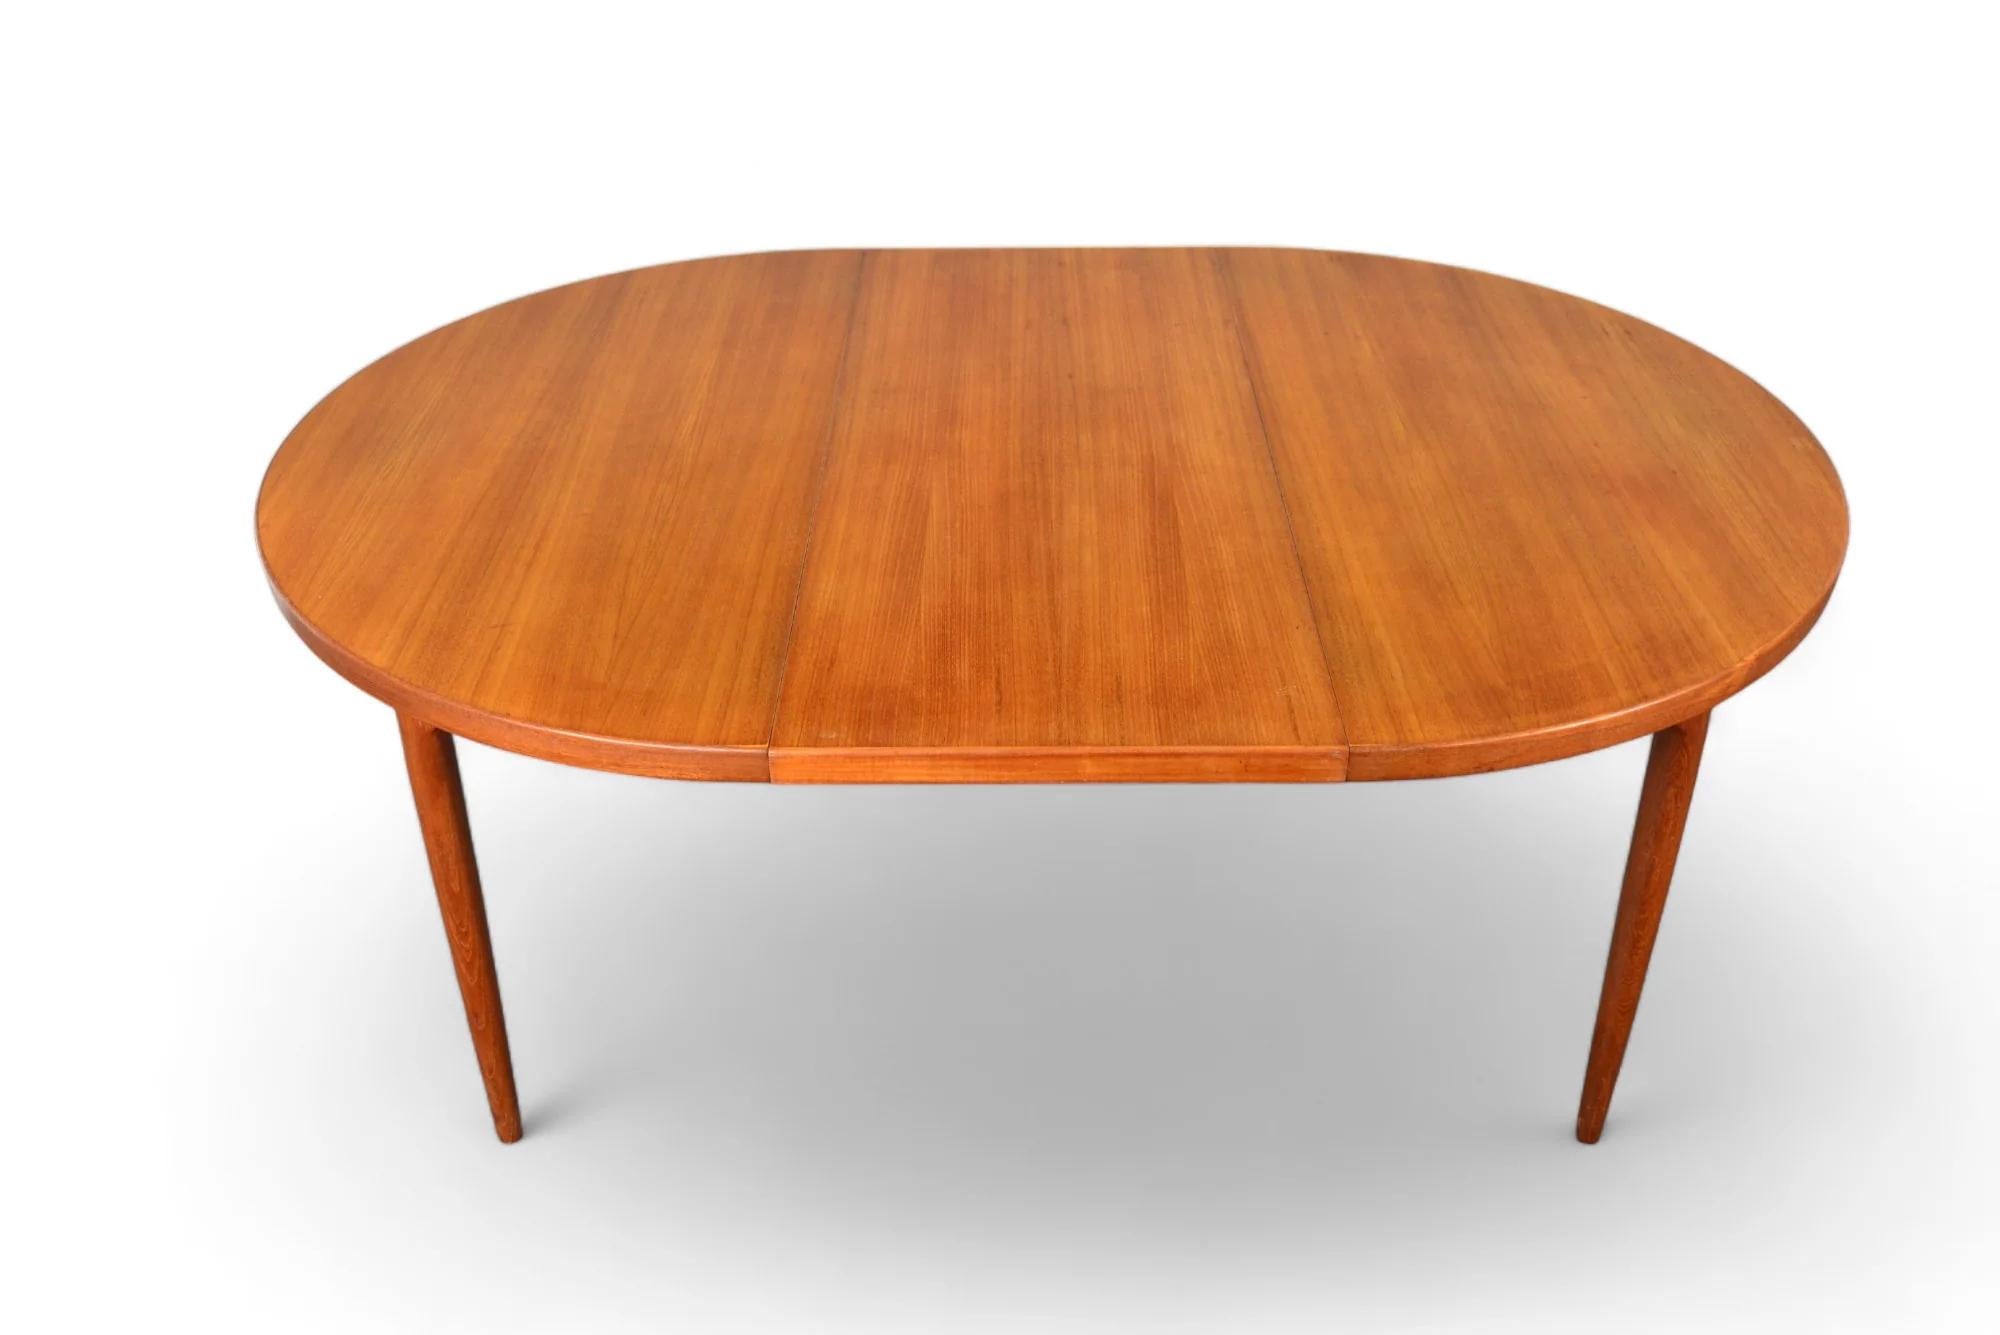 Round Danish 2 Leaf Teak Dining Table By Cj Rosengaarden + Coffee Table For Sale 1